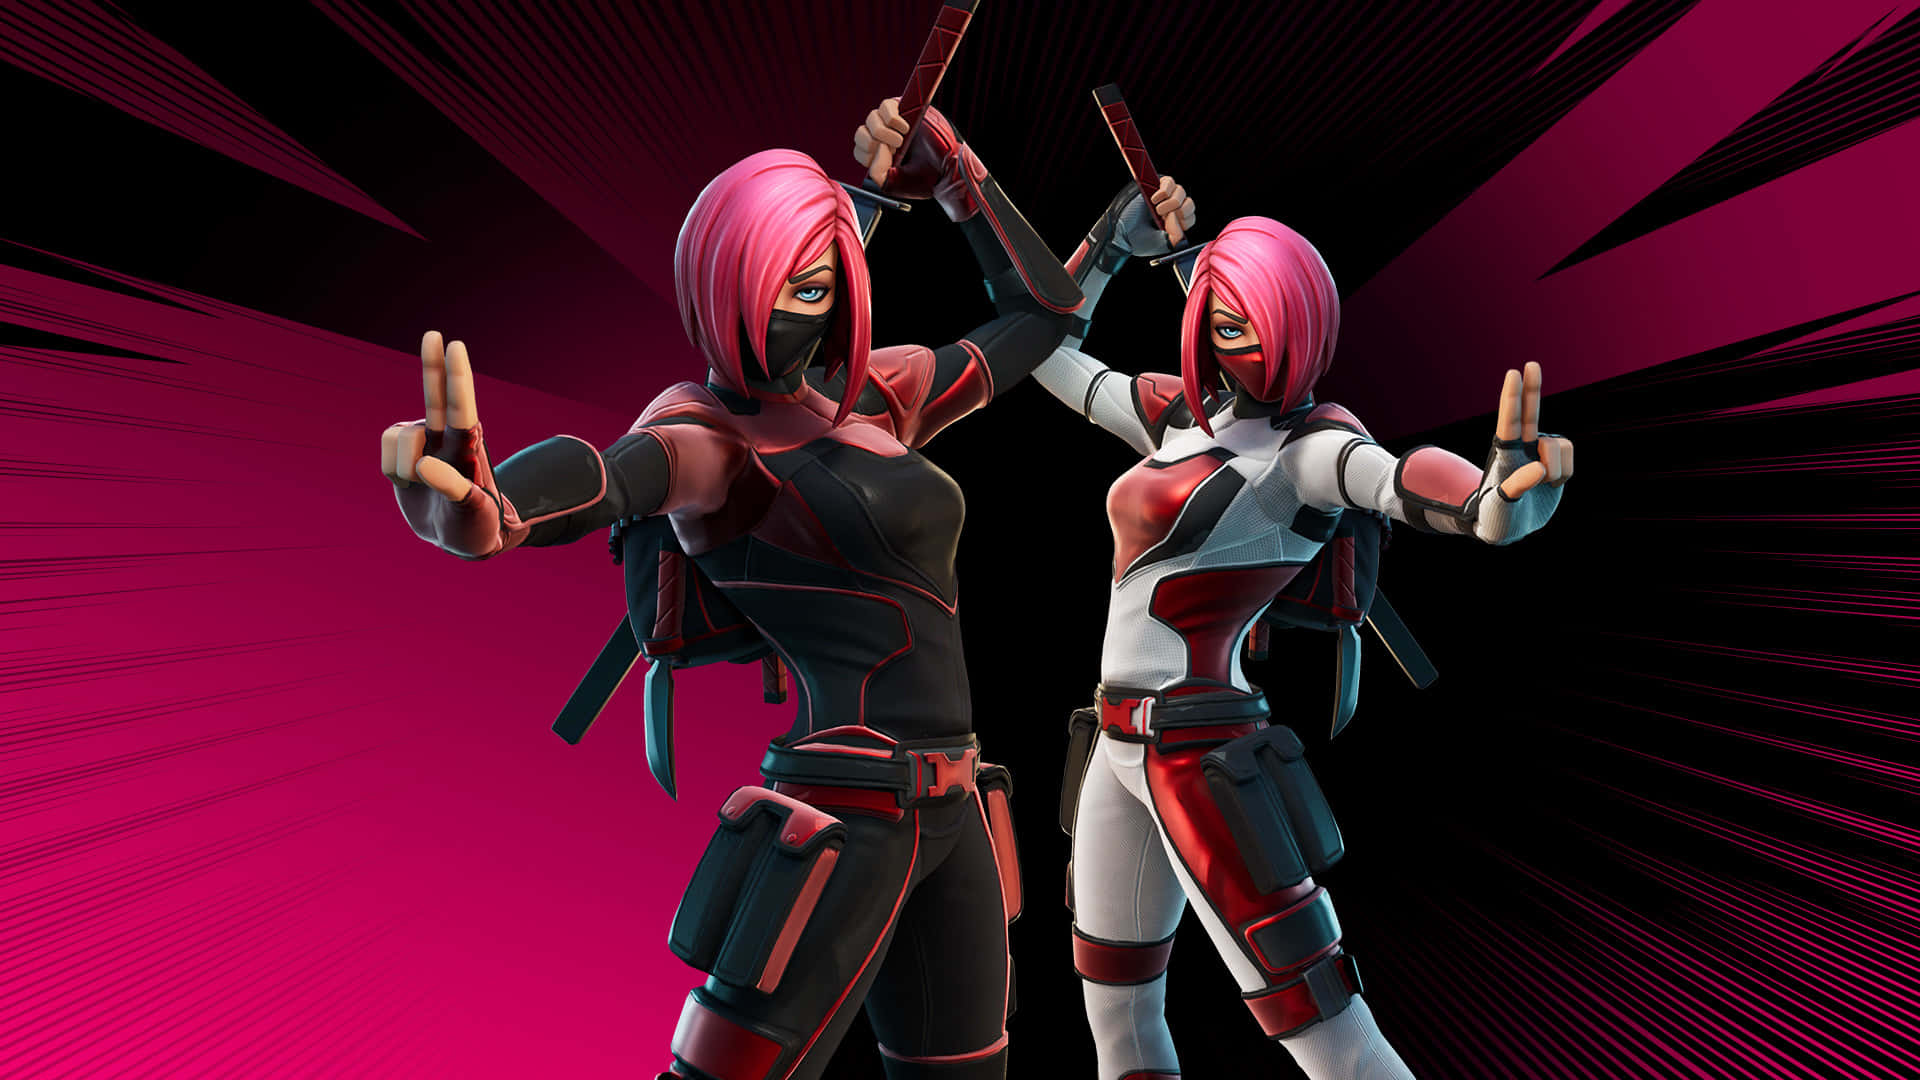 Two Pink Characters With Guns In Front Of A Pink Background Wallpaper